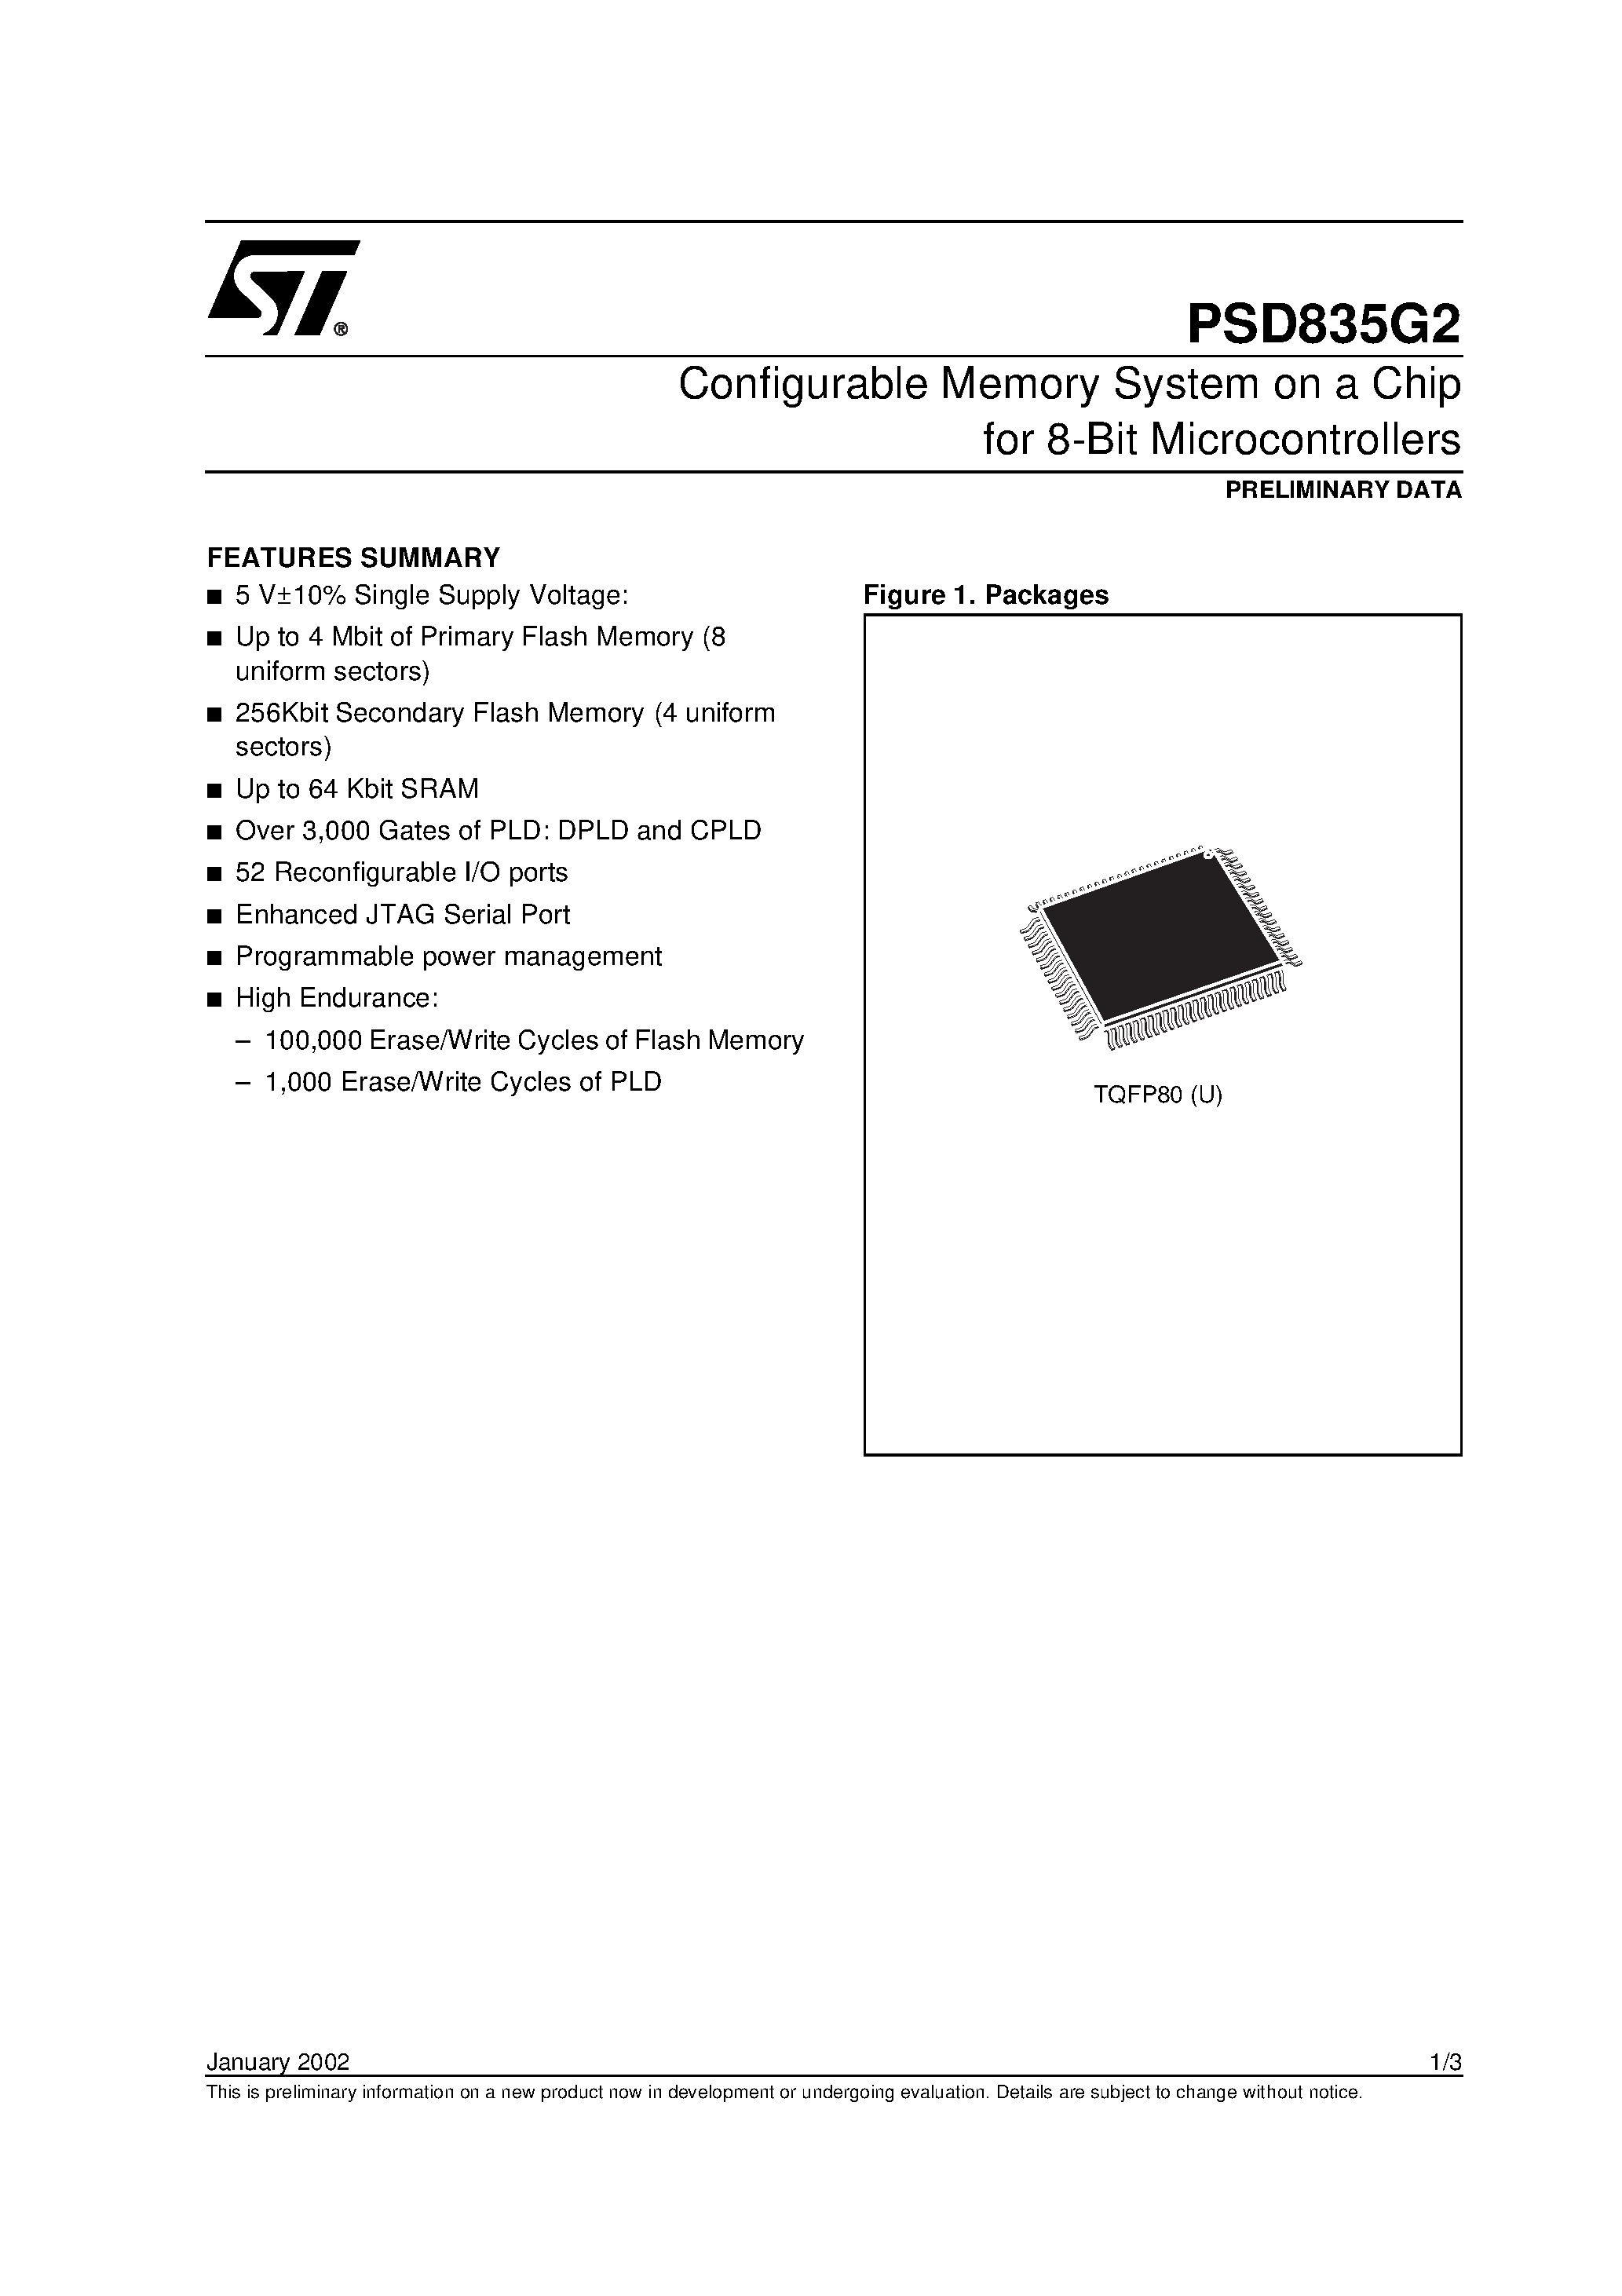 Datasheet PSD835F1V-A-70J - Configurable Memory System on a Chip for 8-Bit Microcontrollers page 1